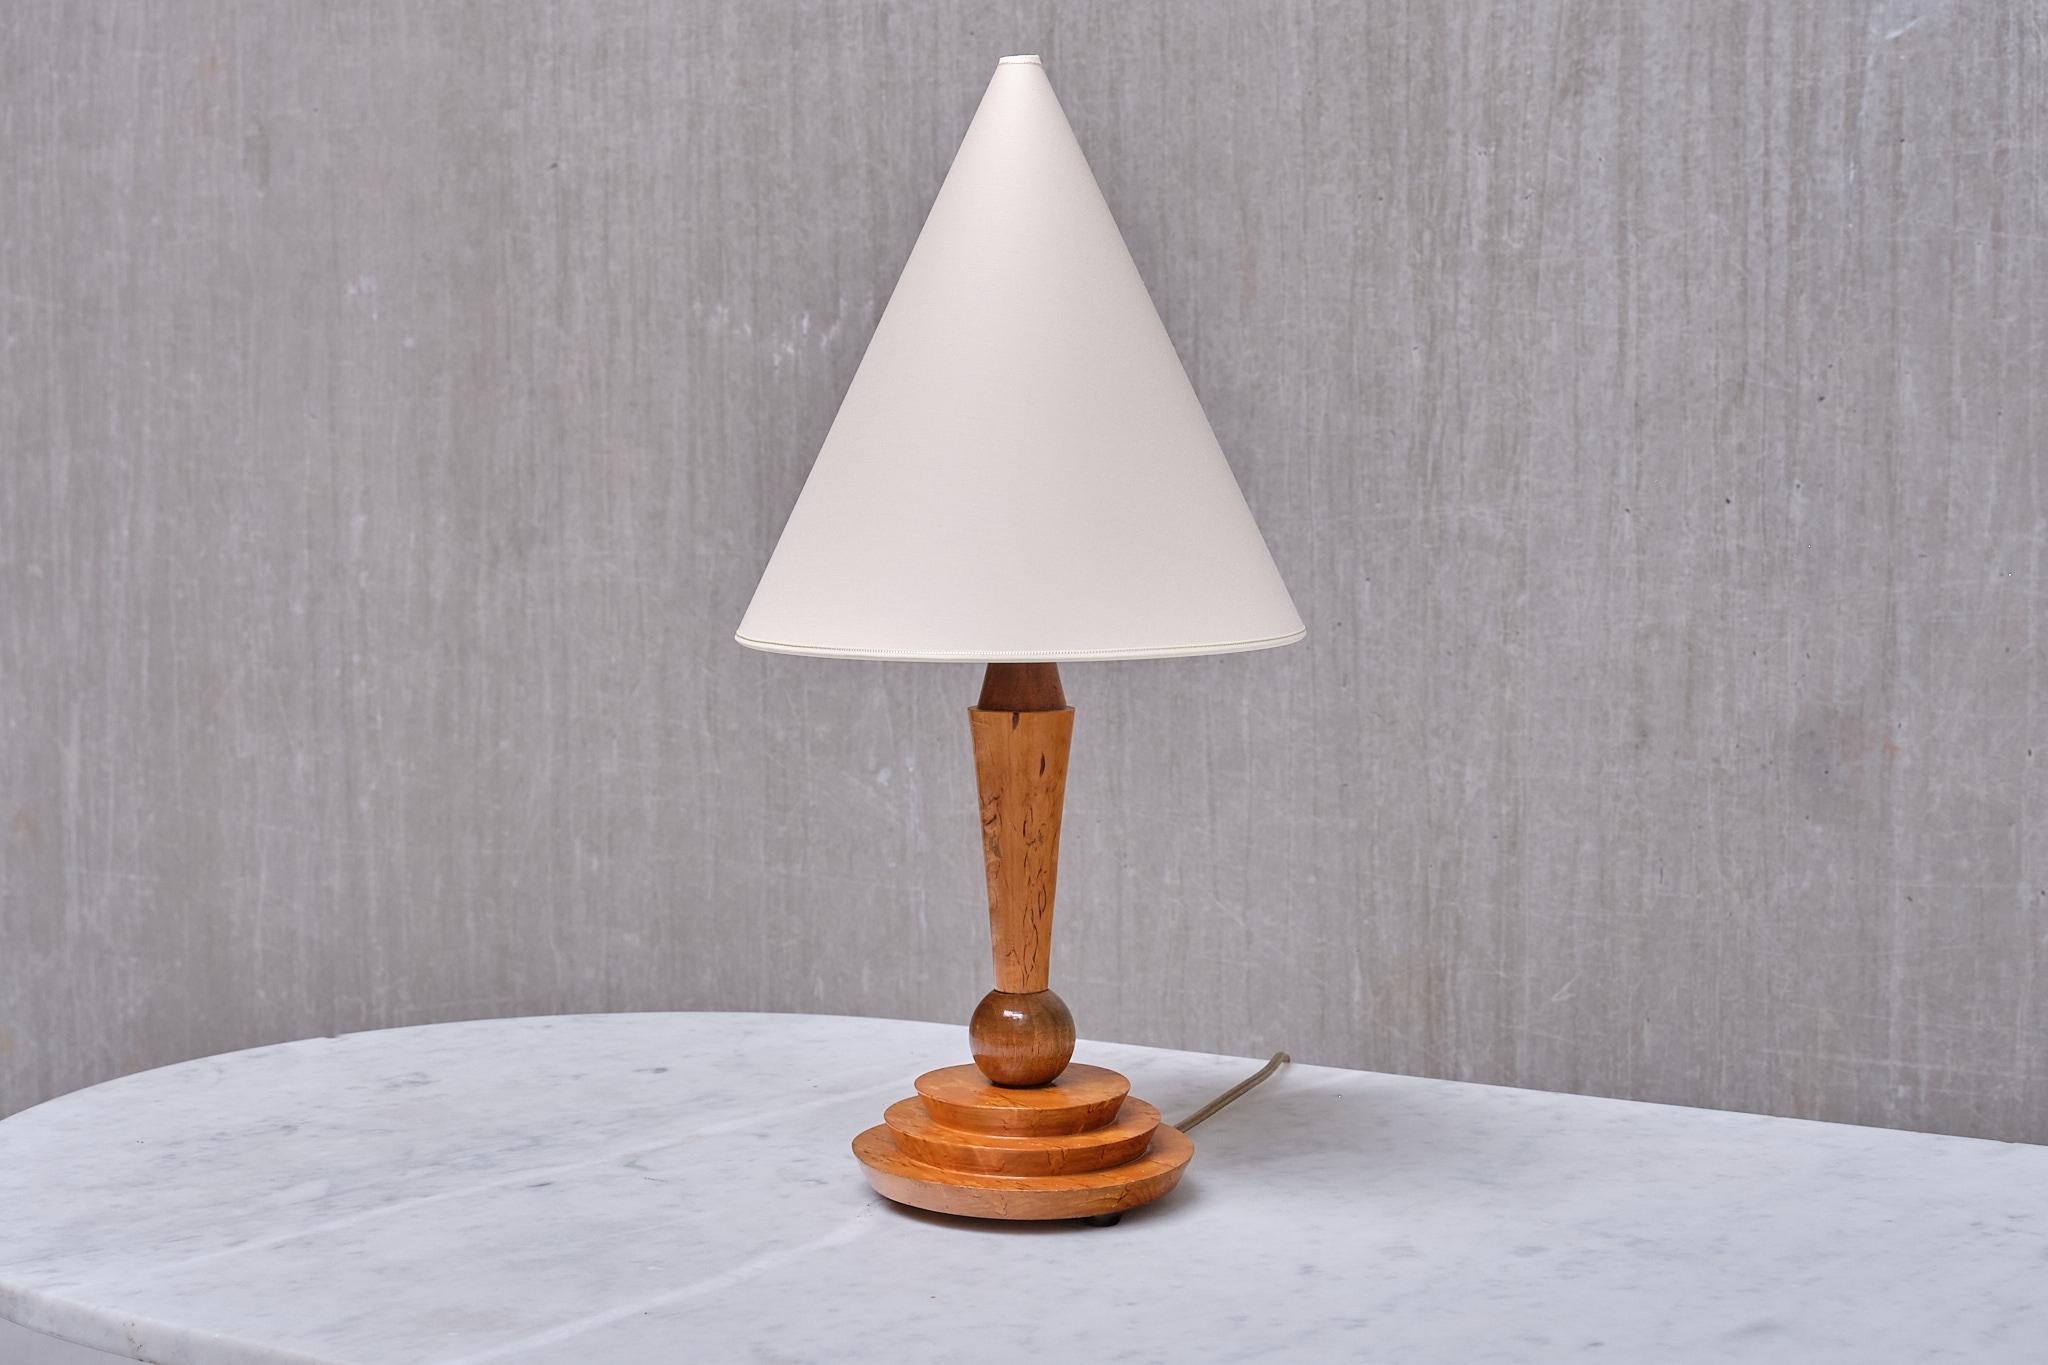 This striking Art Deco table lamp was produced in Austria in the late 1930s. 

The design is marked by the elegant shape of the base which has executed in lacquered maple and Birdseye maple wood. The lamp consists of a three tiered circular base,